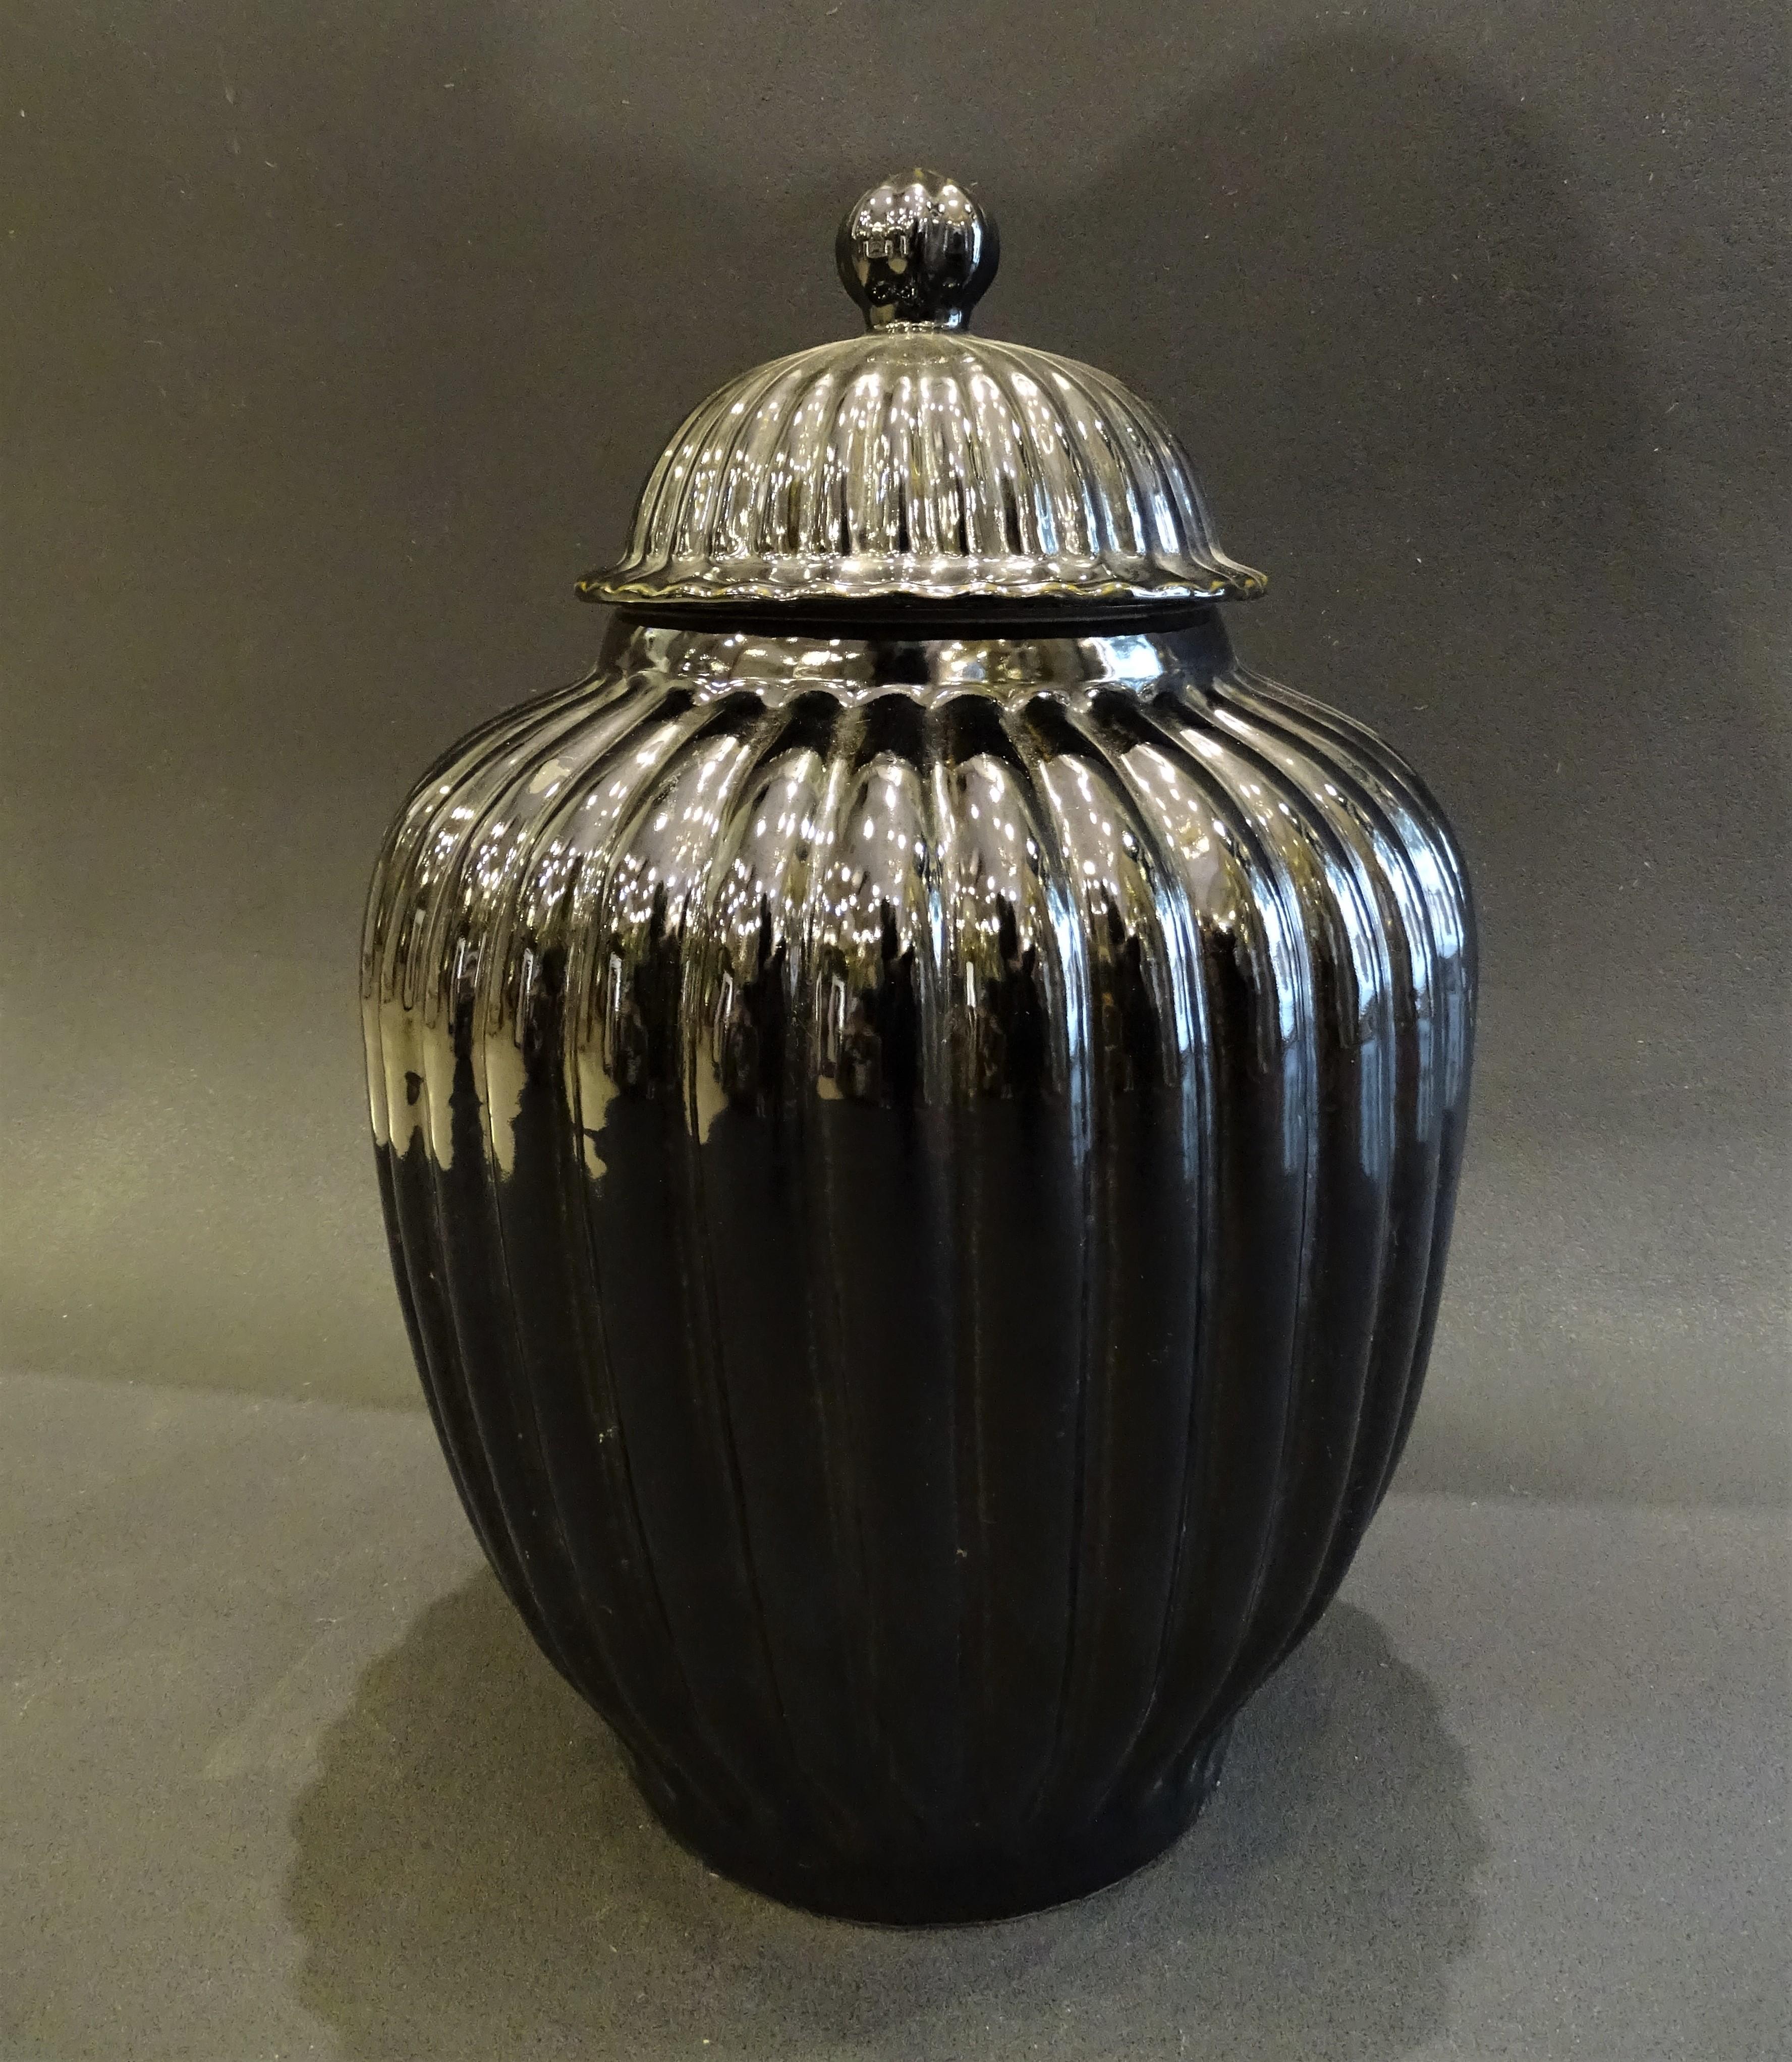 Amazing pair of Italian black  vases or Bucaros with lid ,in black ceramic , large in size and of great decorative strength in their shapes. The pieces are made by hand, so each piece has a unique finish.

 They are two pieces of high decorative and